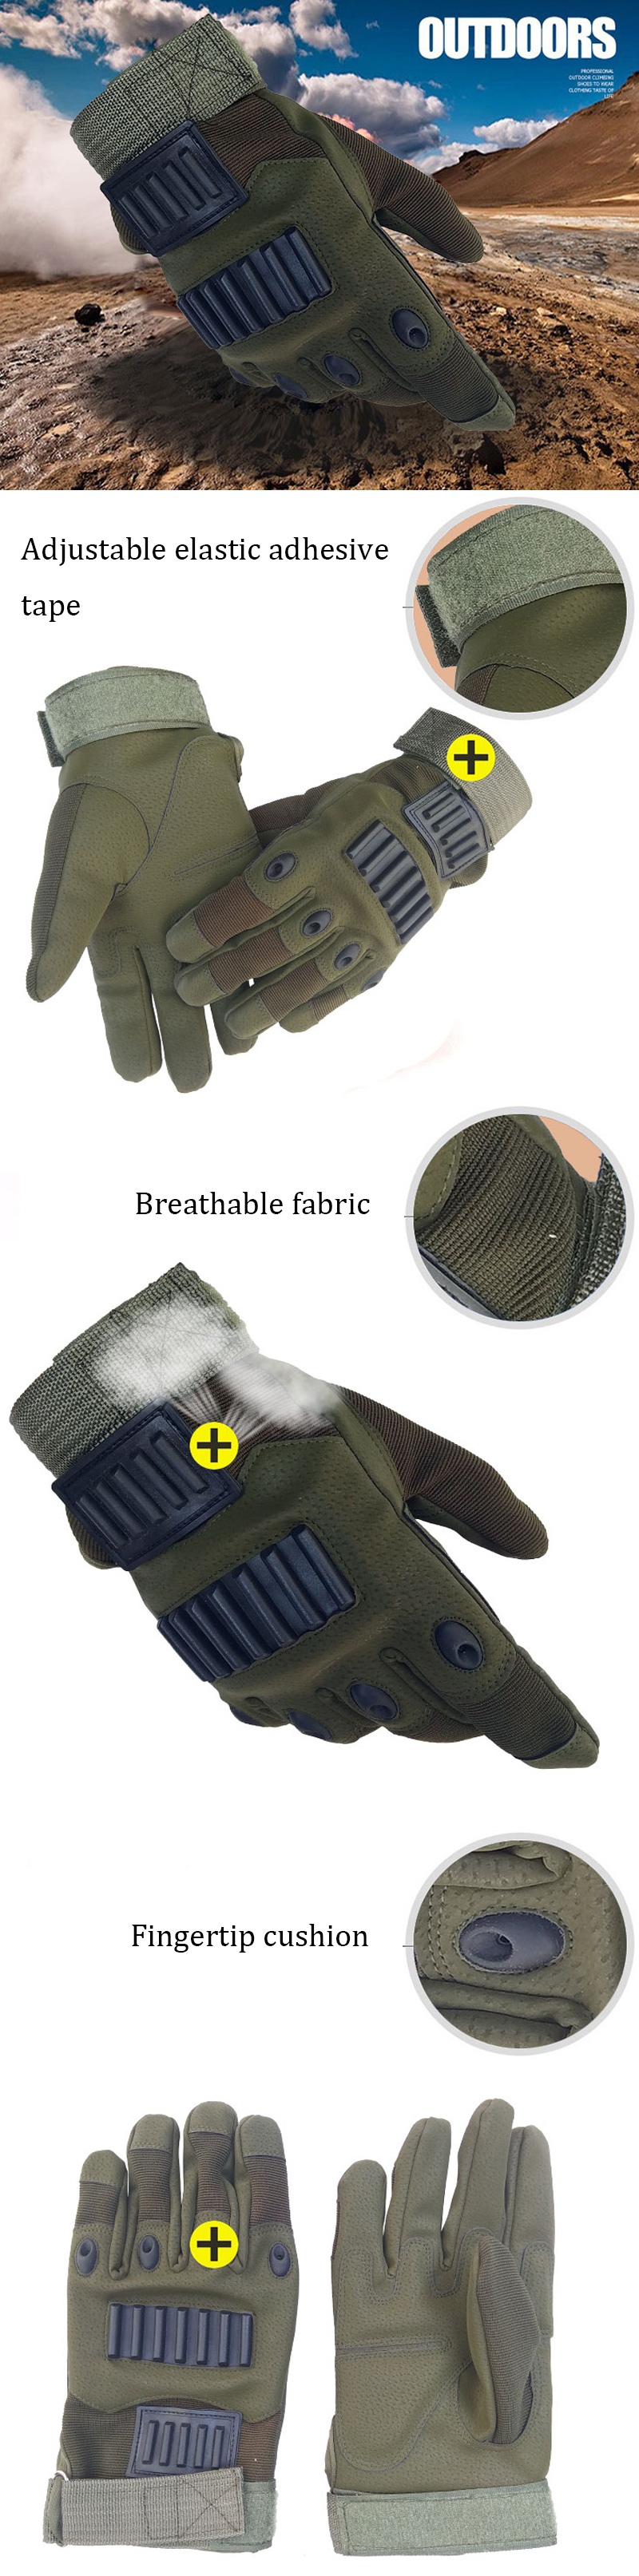 Tactical-Full-Finger-Glove-Outdoor-Hunting-Sport-Cycling-Slip-Resistant-Gloves-1431493-1